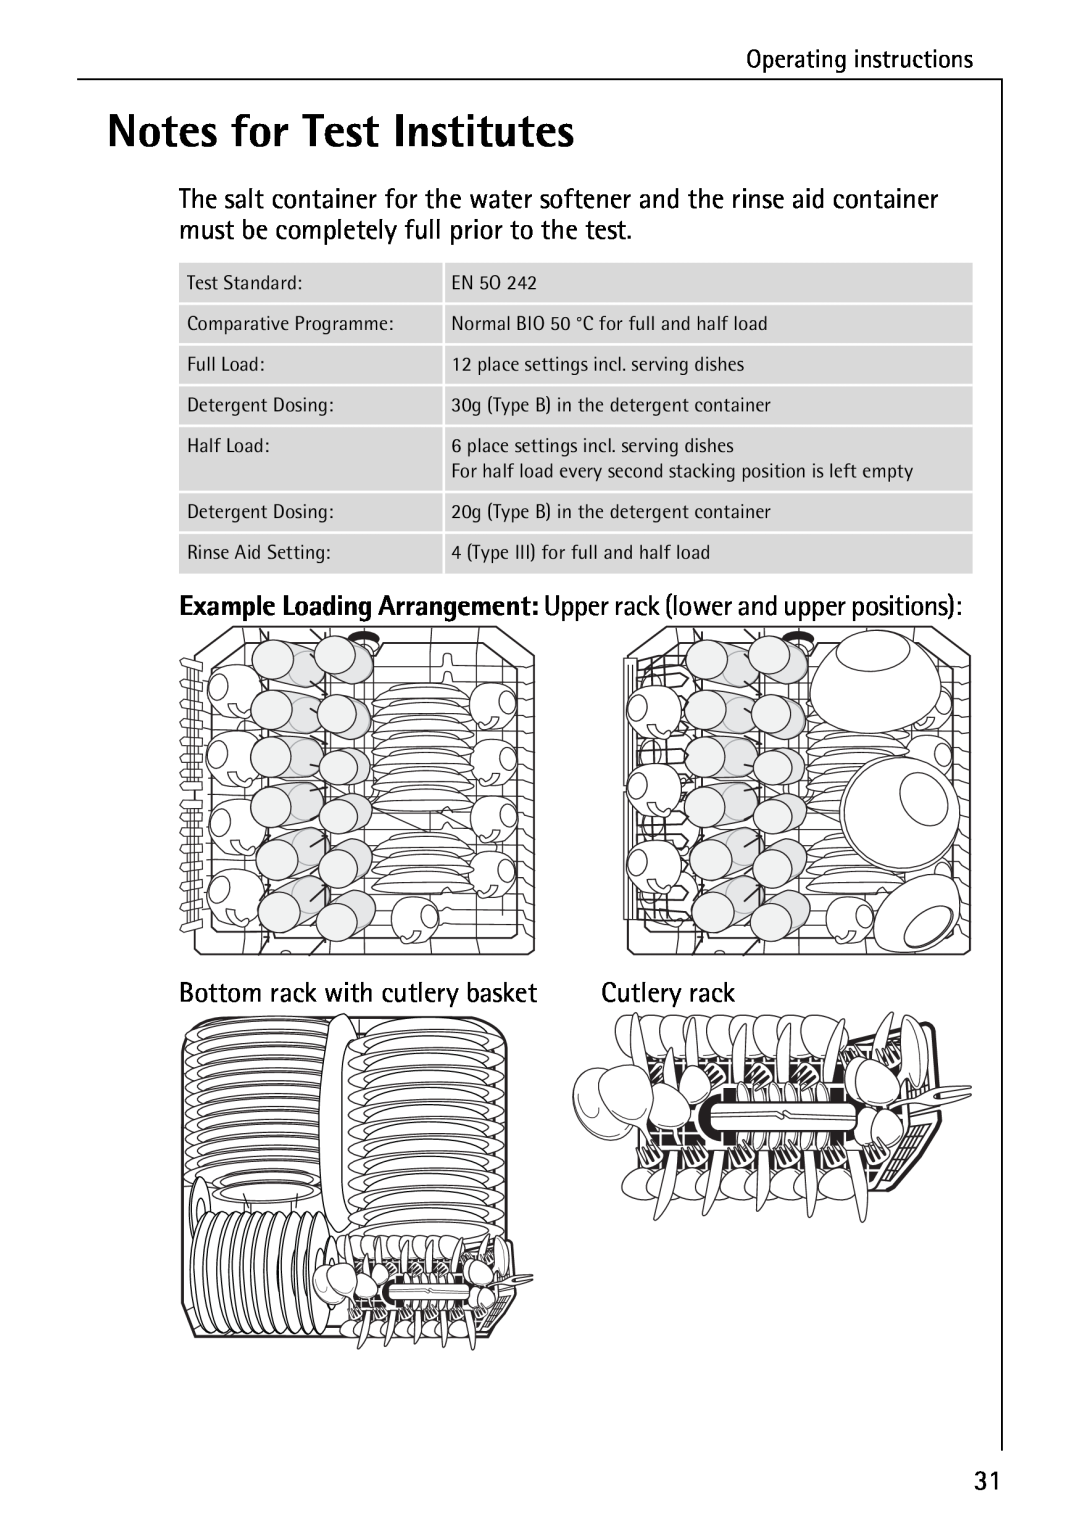 AEG 6281 I manual Notes for Test Institutes, Bottom rack with cutlery basket, Operating instructions 